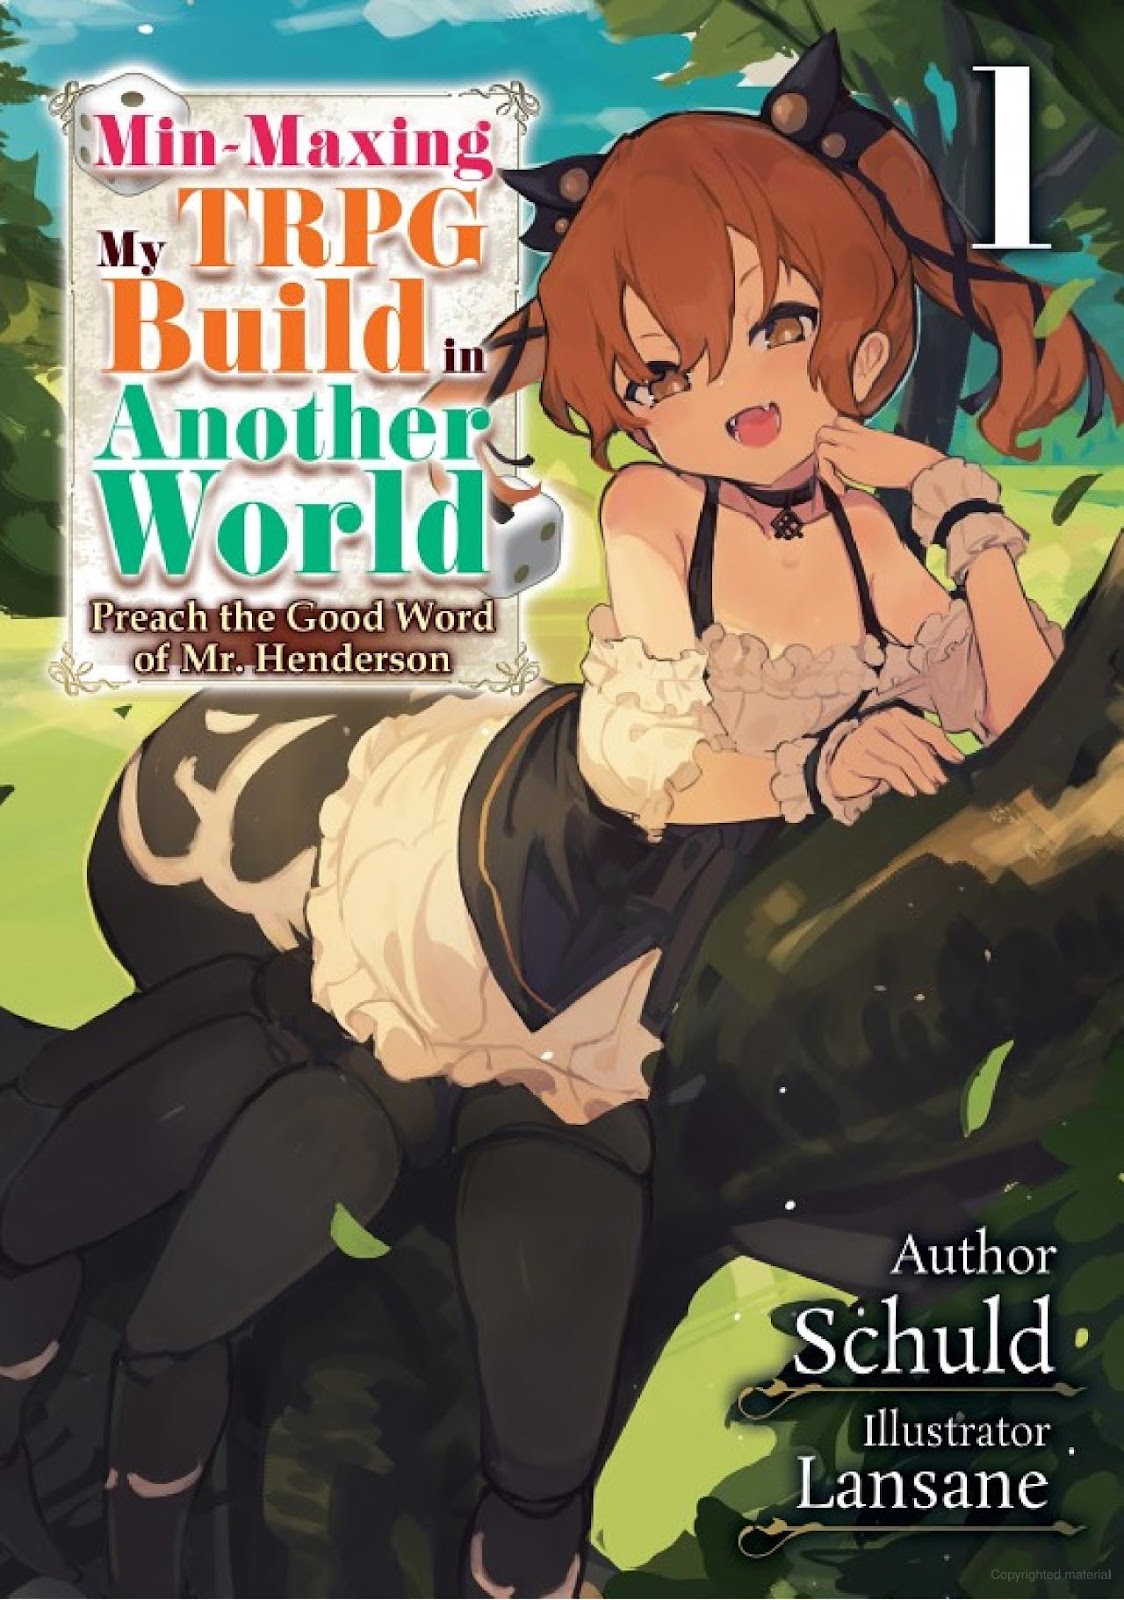 Cover of Min-Maxing My TRPG Build in Another World. Author is Schuld. Illustrator is Lansane.